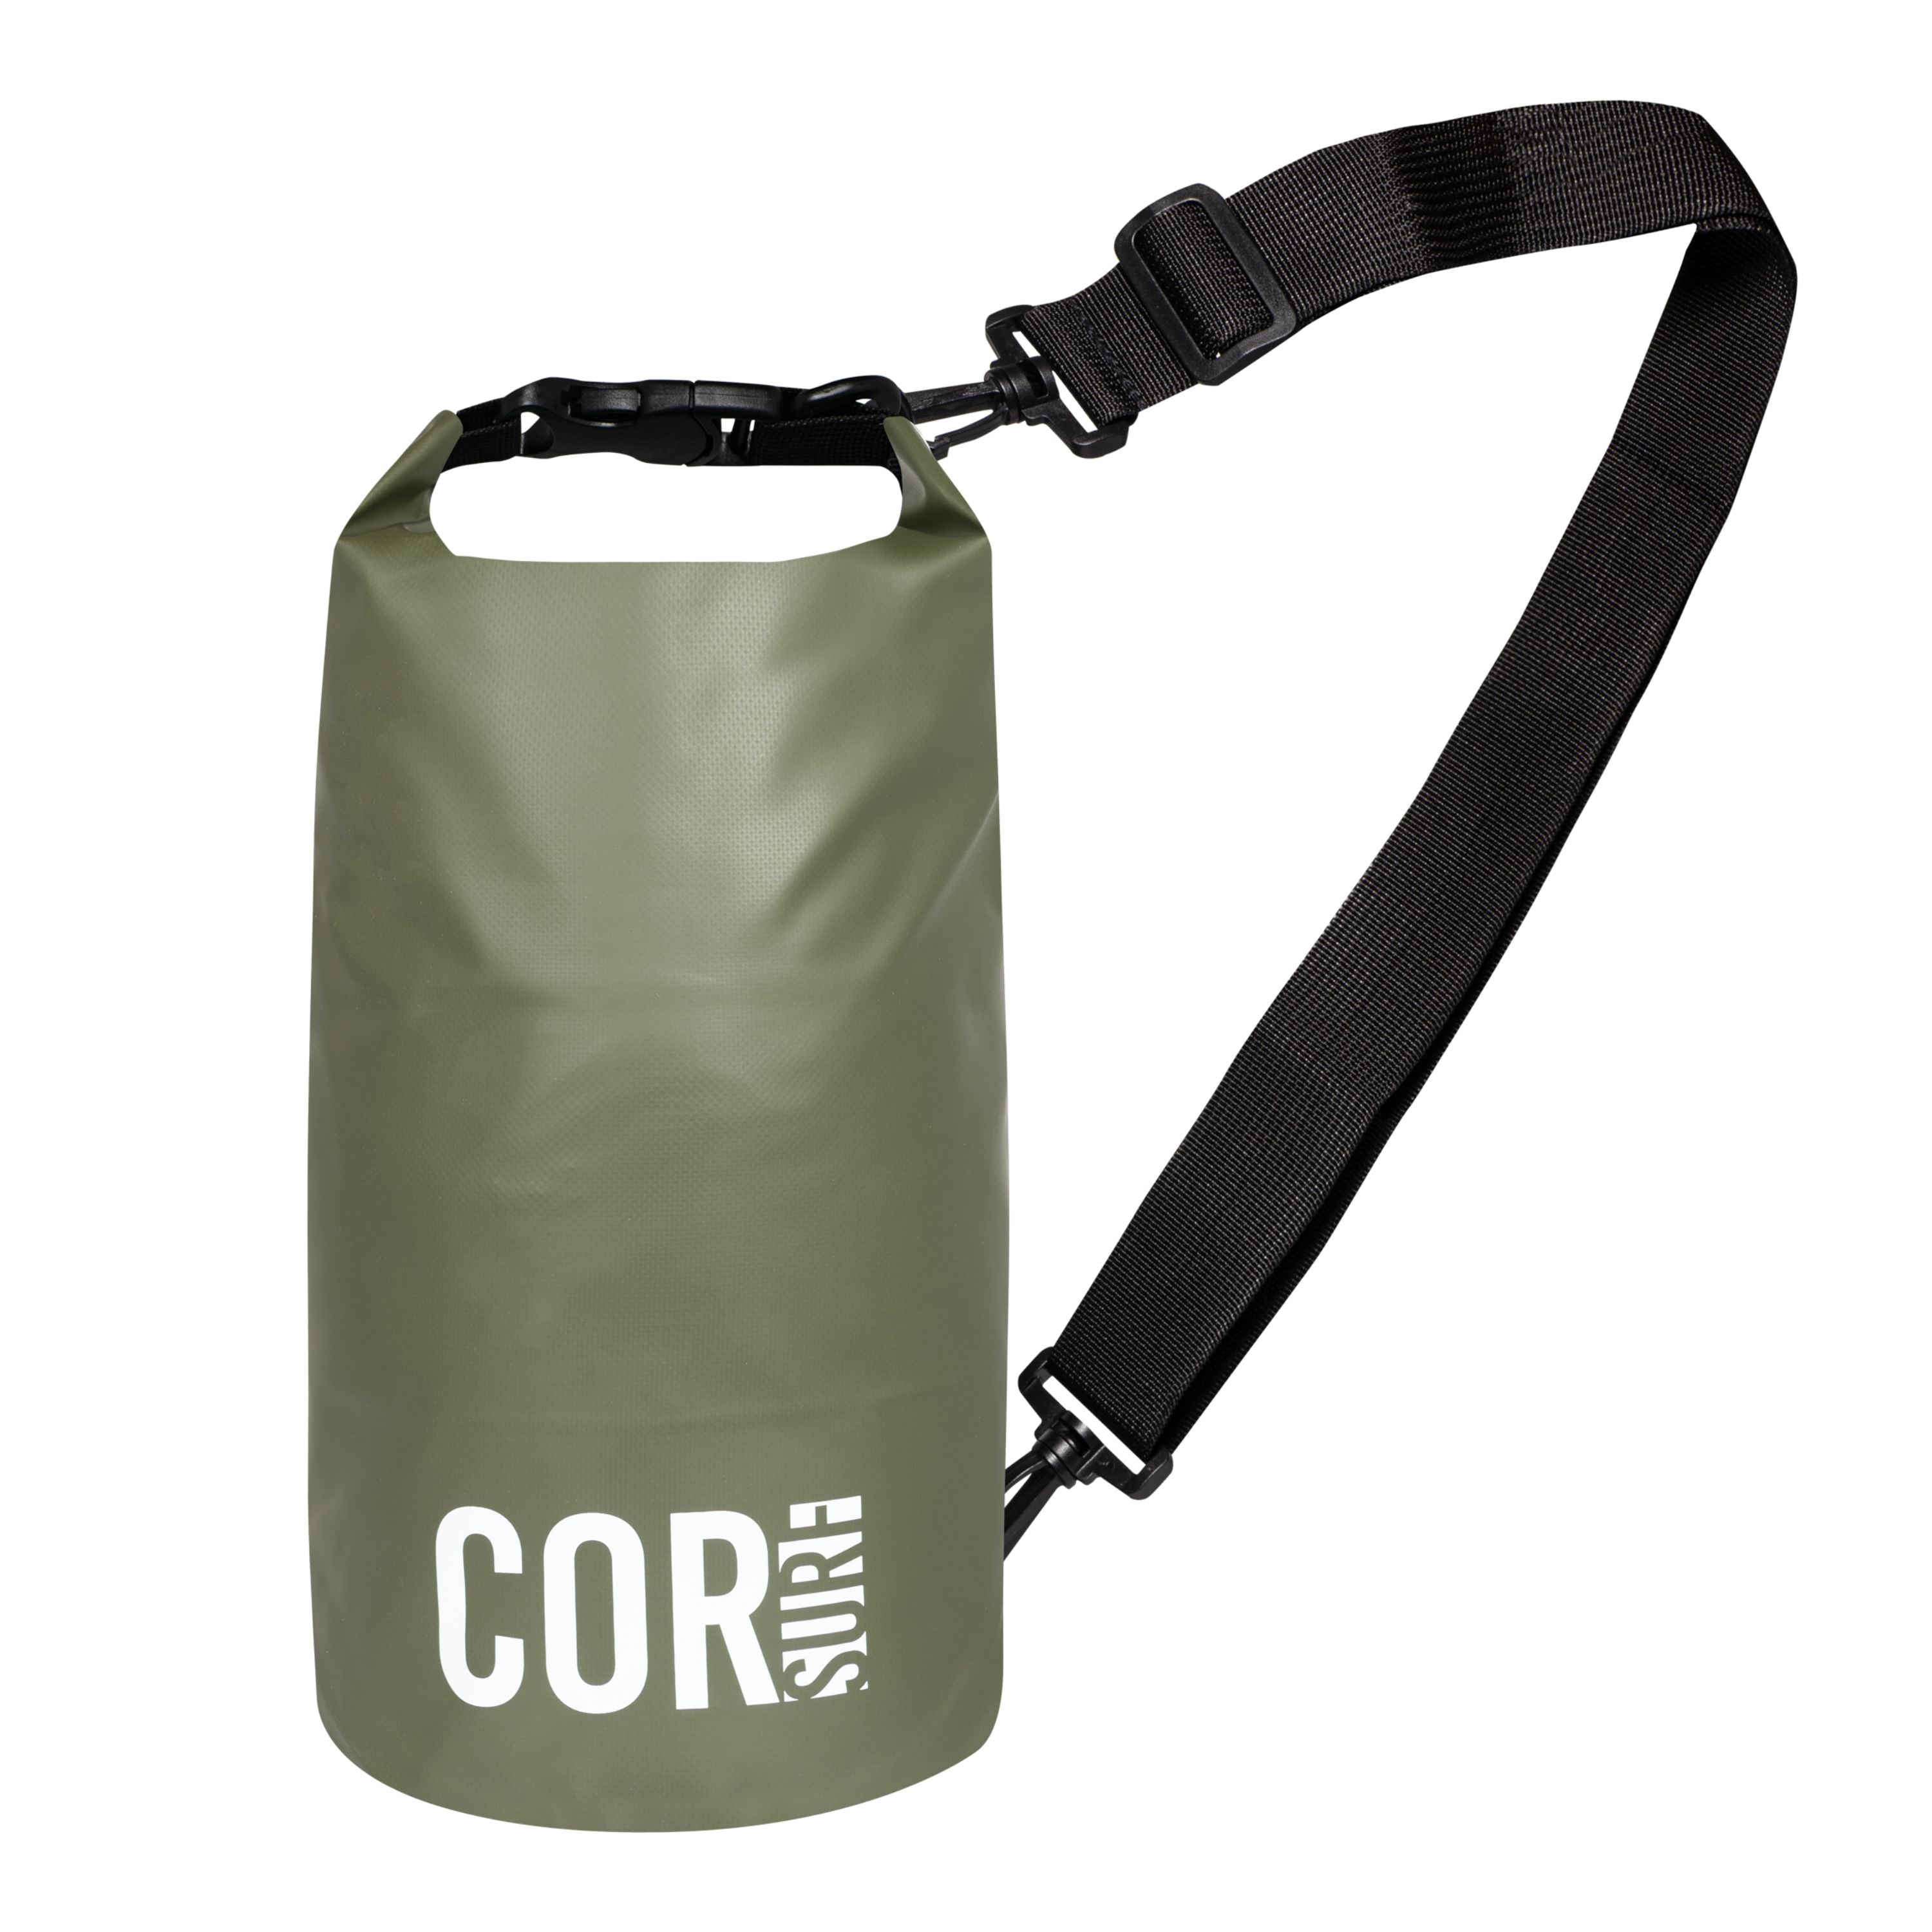 Single Dry Bags Available in: 3L, 5L, 10L or 15L